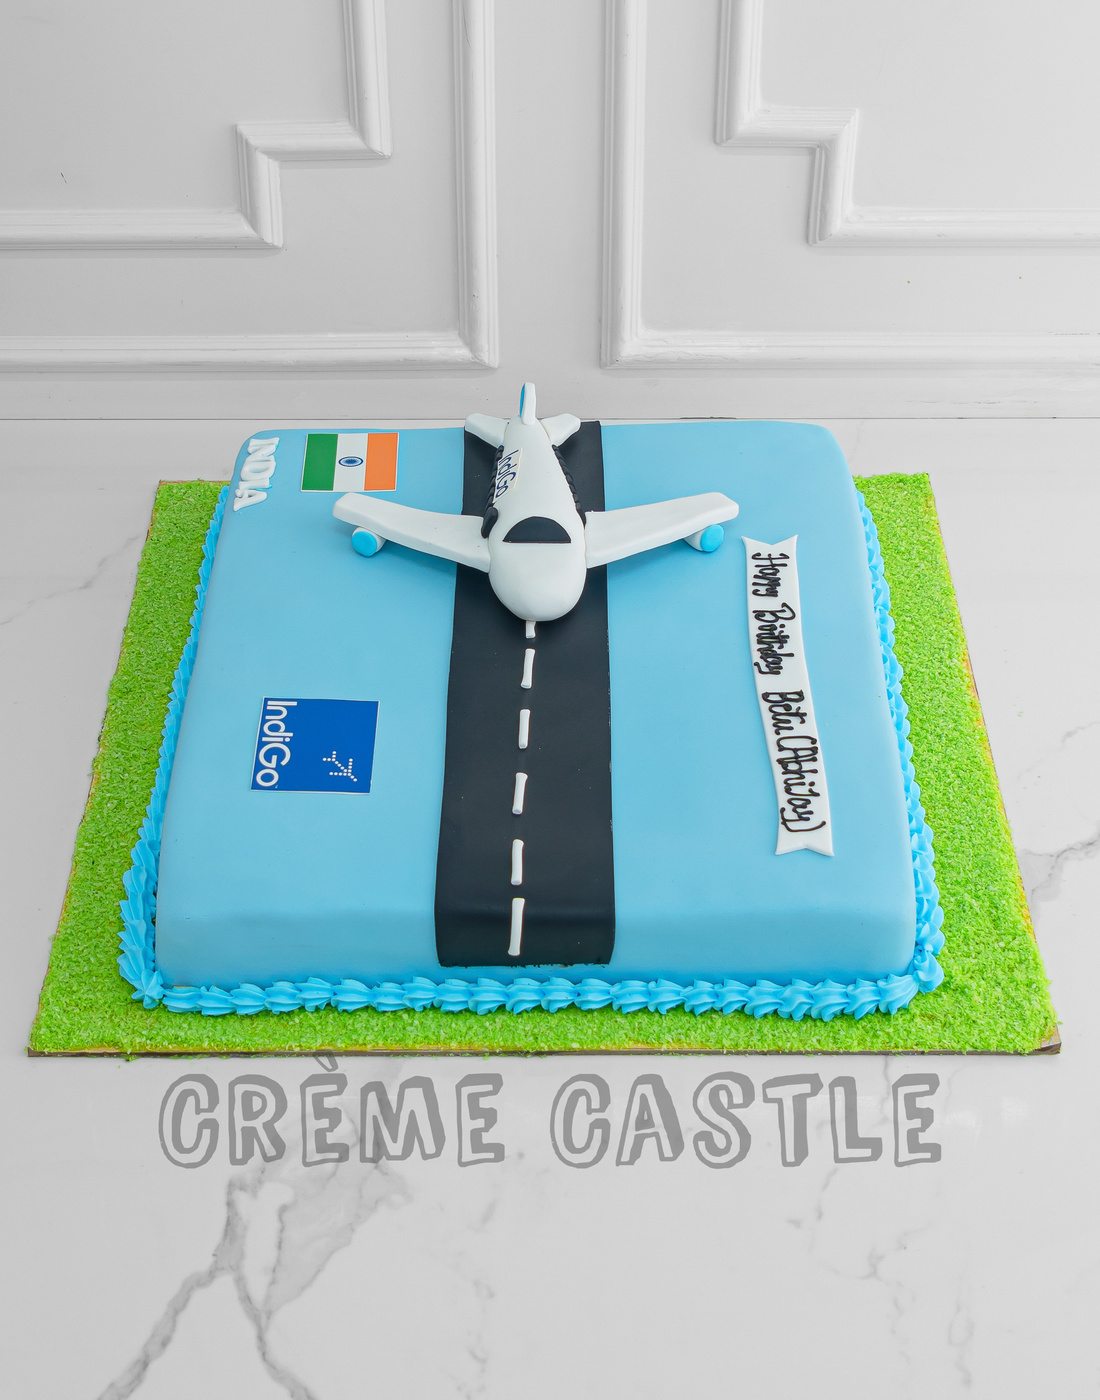 Plane Cake - Decorated Cake by Alll - CakesDecor